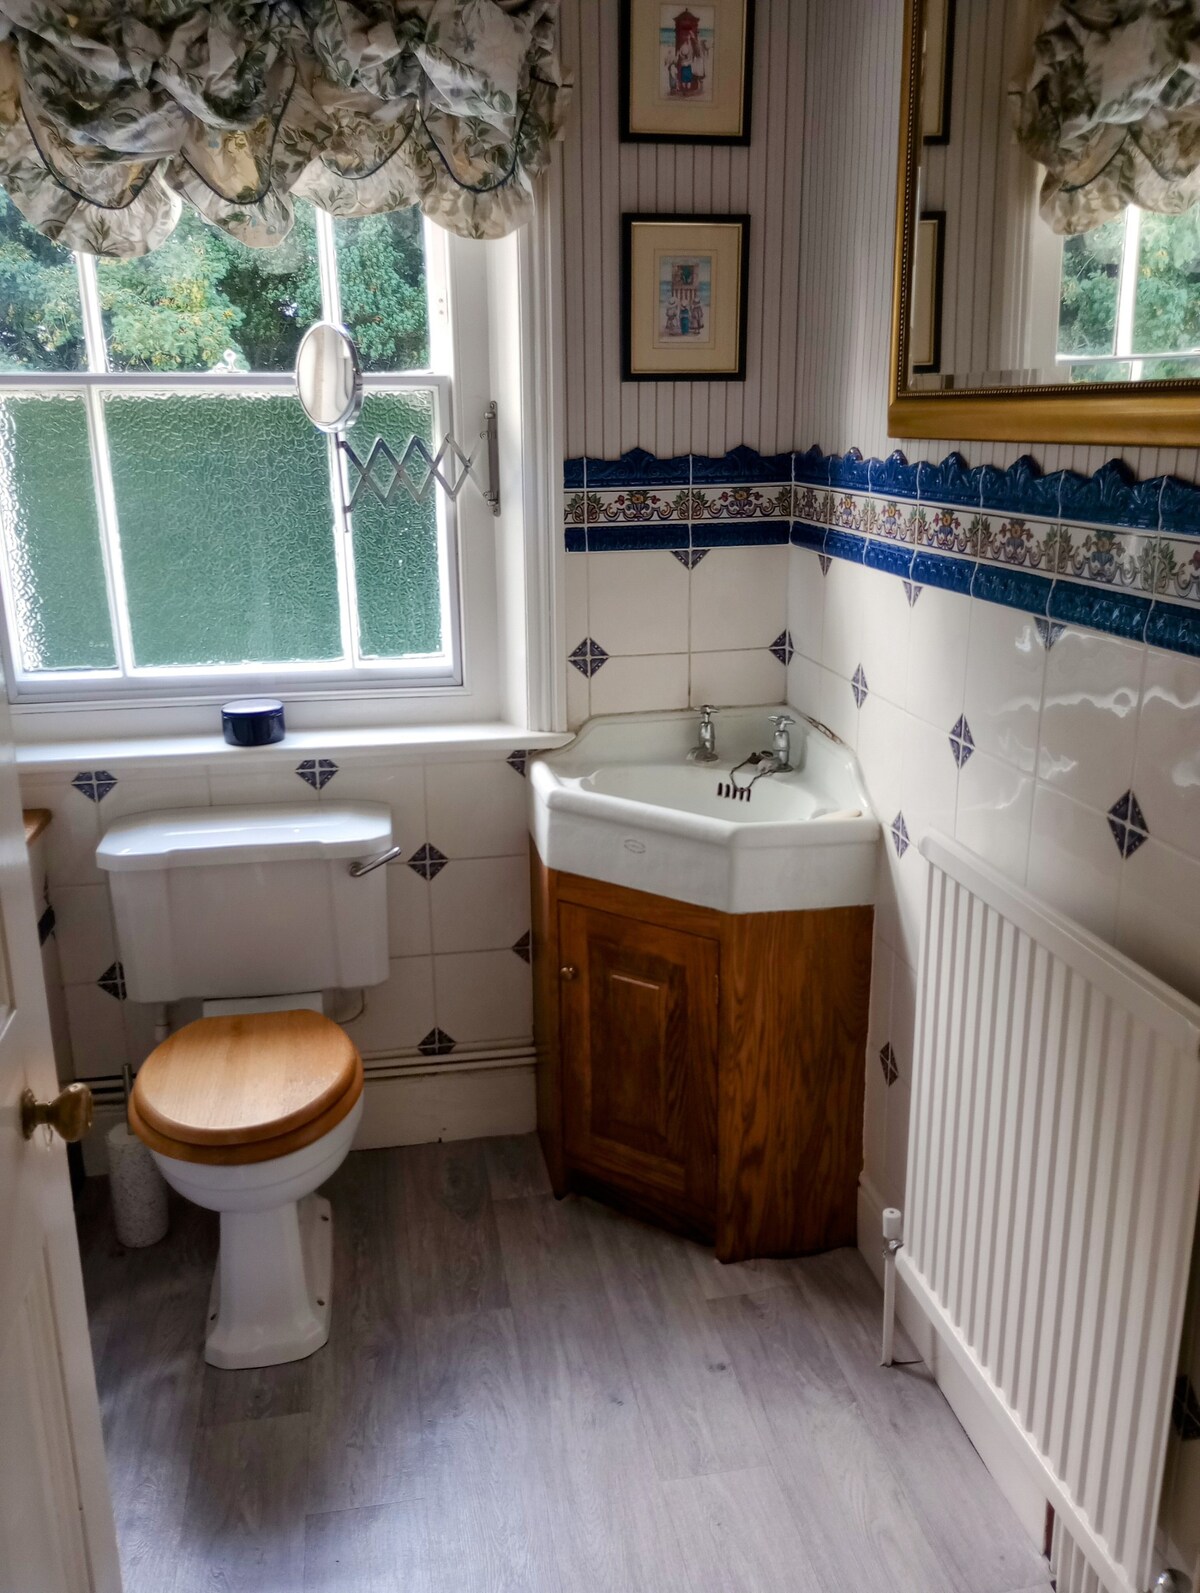 A single room in a Victorian house in a village.